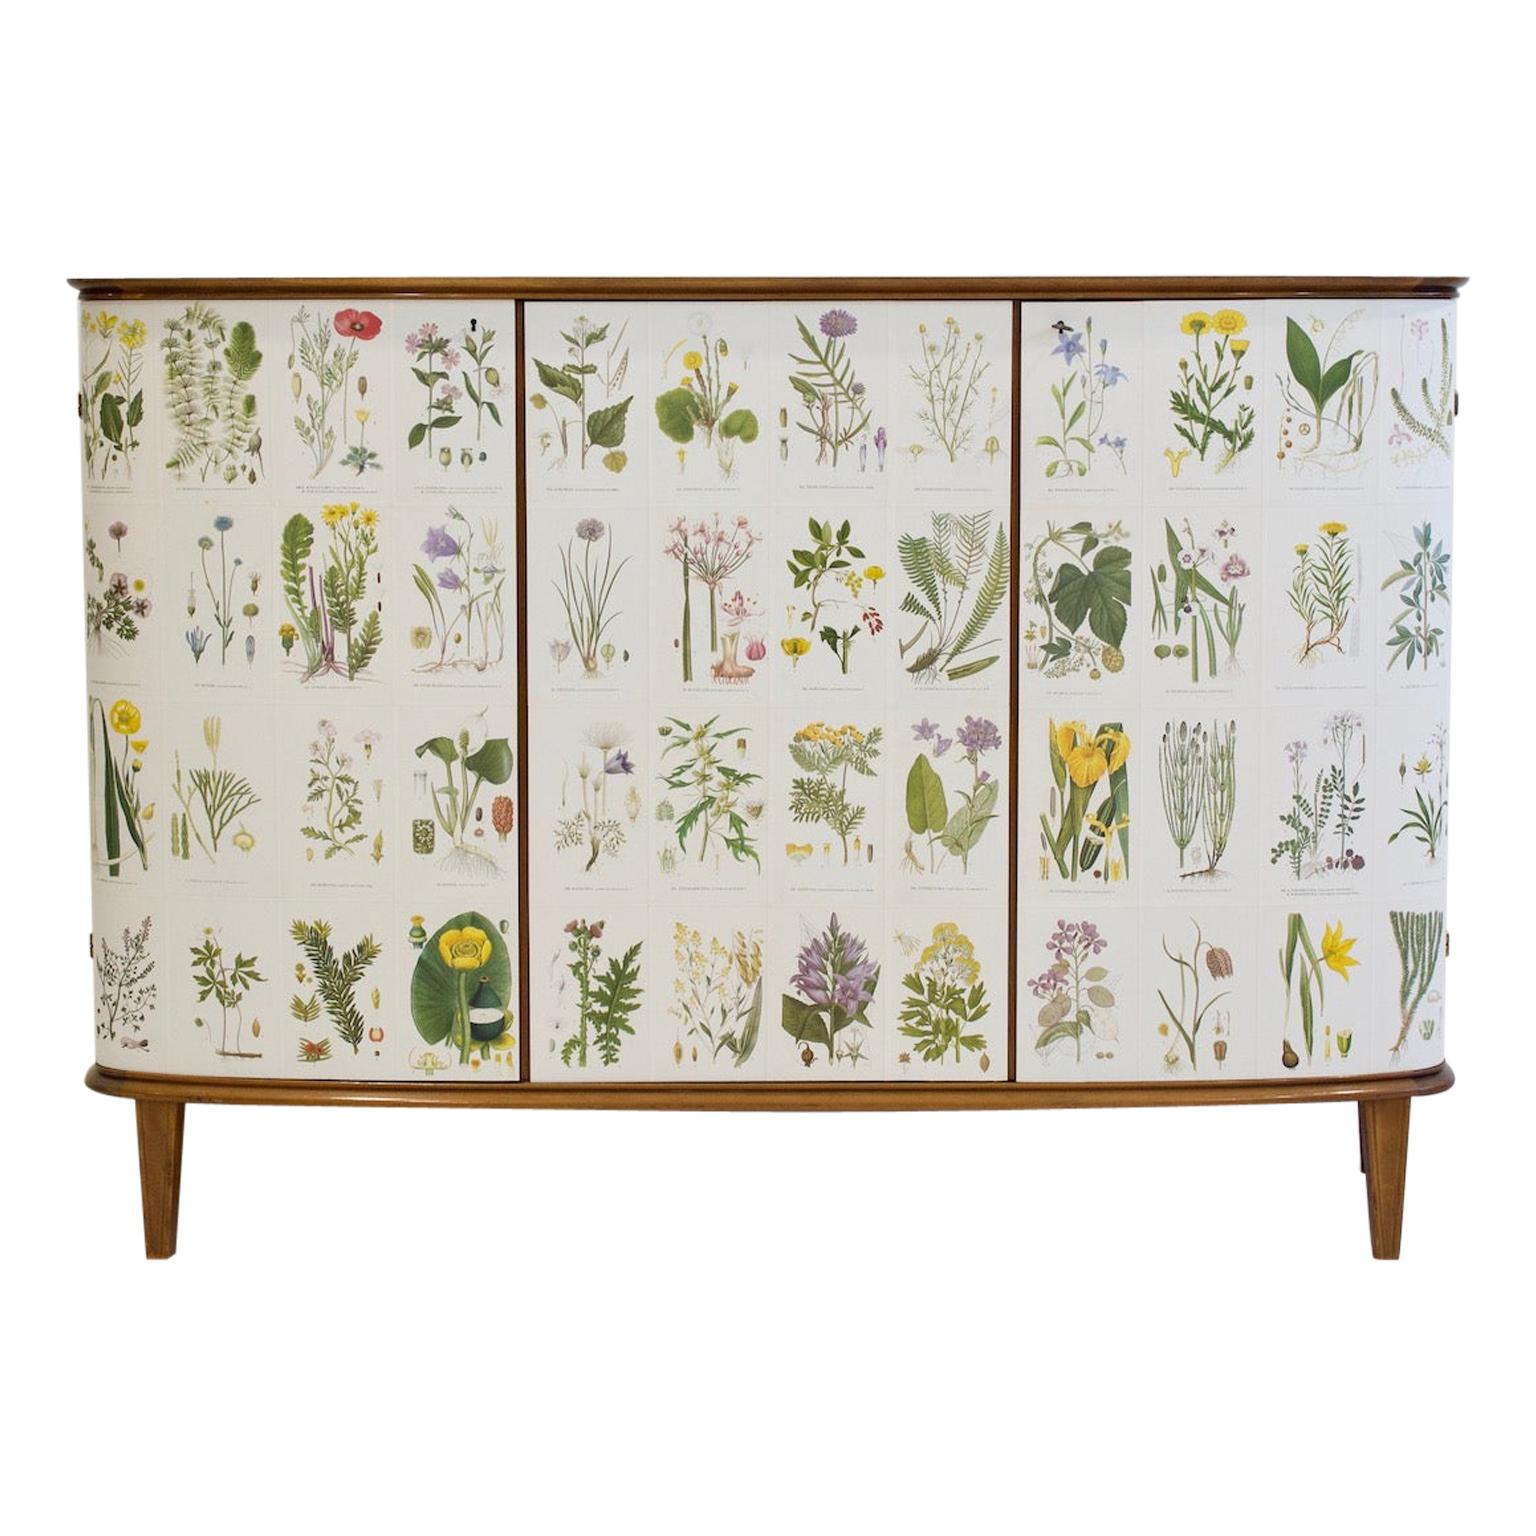 Mid-20th Century Cabinet with Nordens Flora Illustrations by C. Lindman